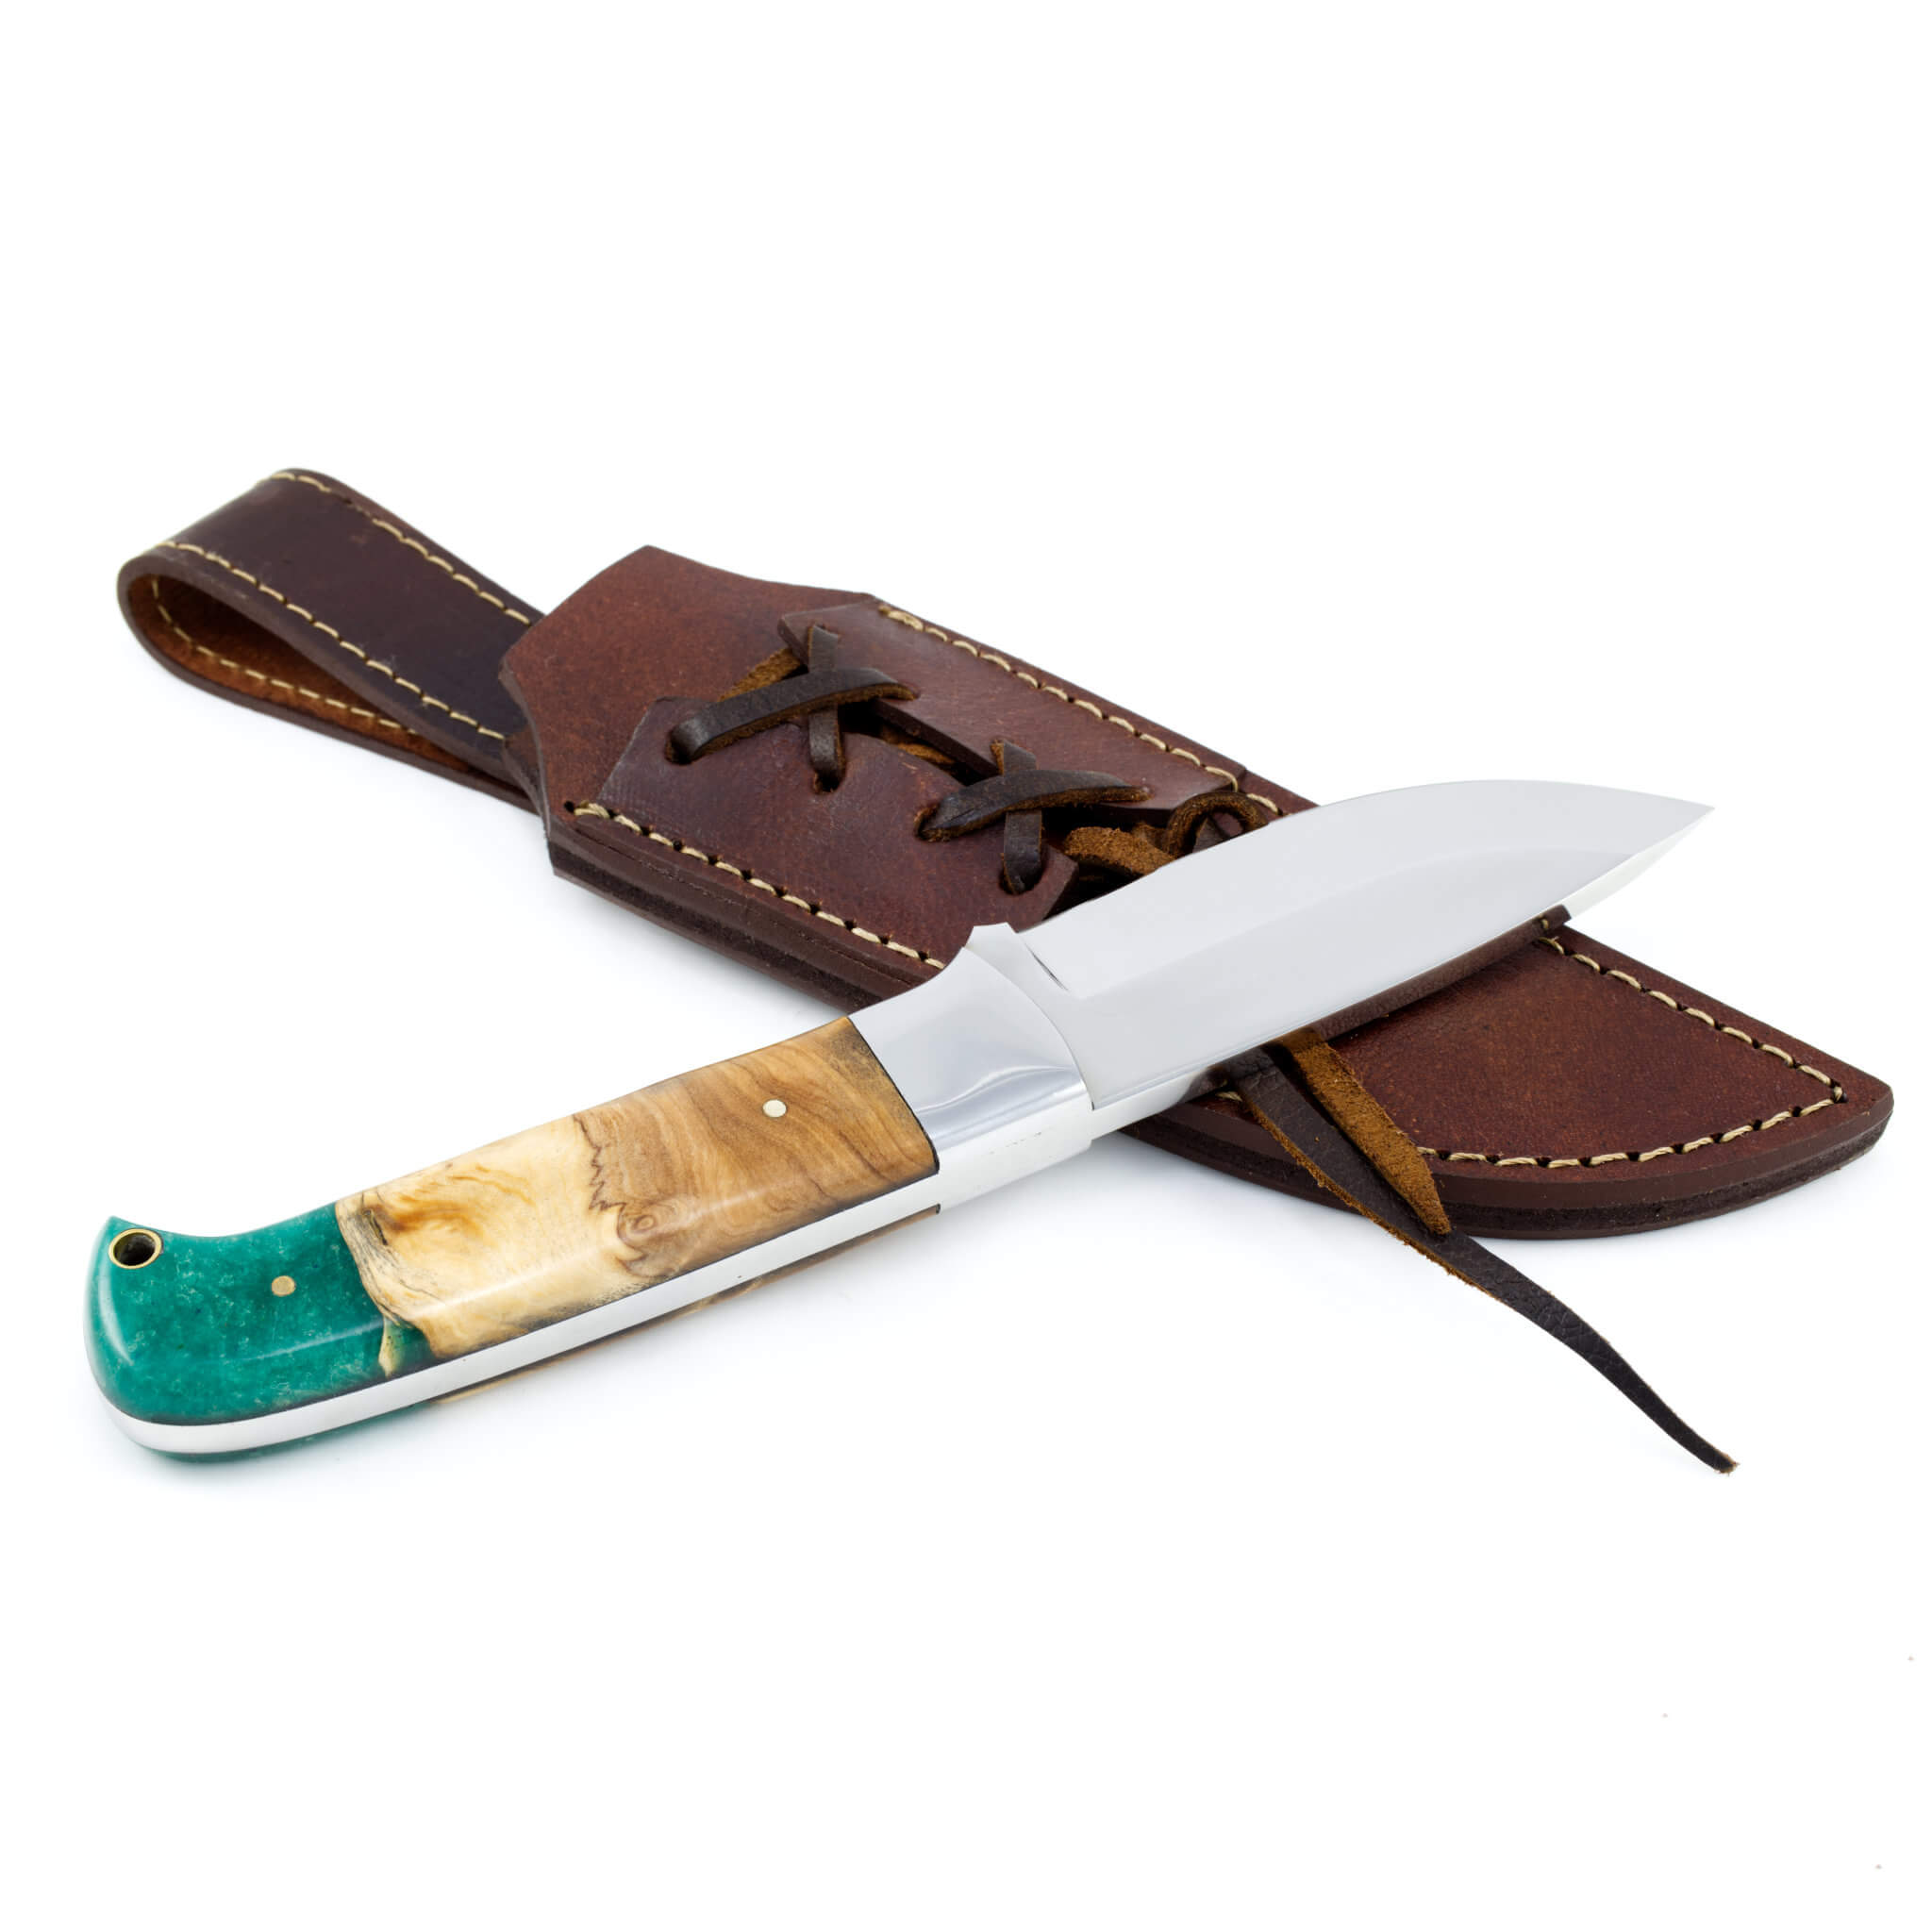 Moxie Momentum Handmade Hunting Knife Vacuum Tempered D2 Stainless Steel Full Tang Blade Olivewood and Resin Handle